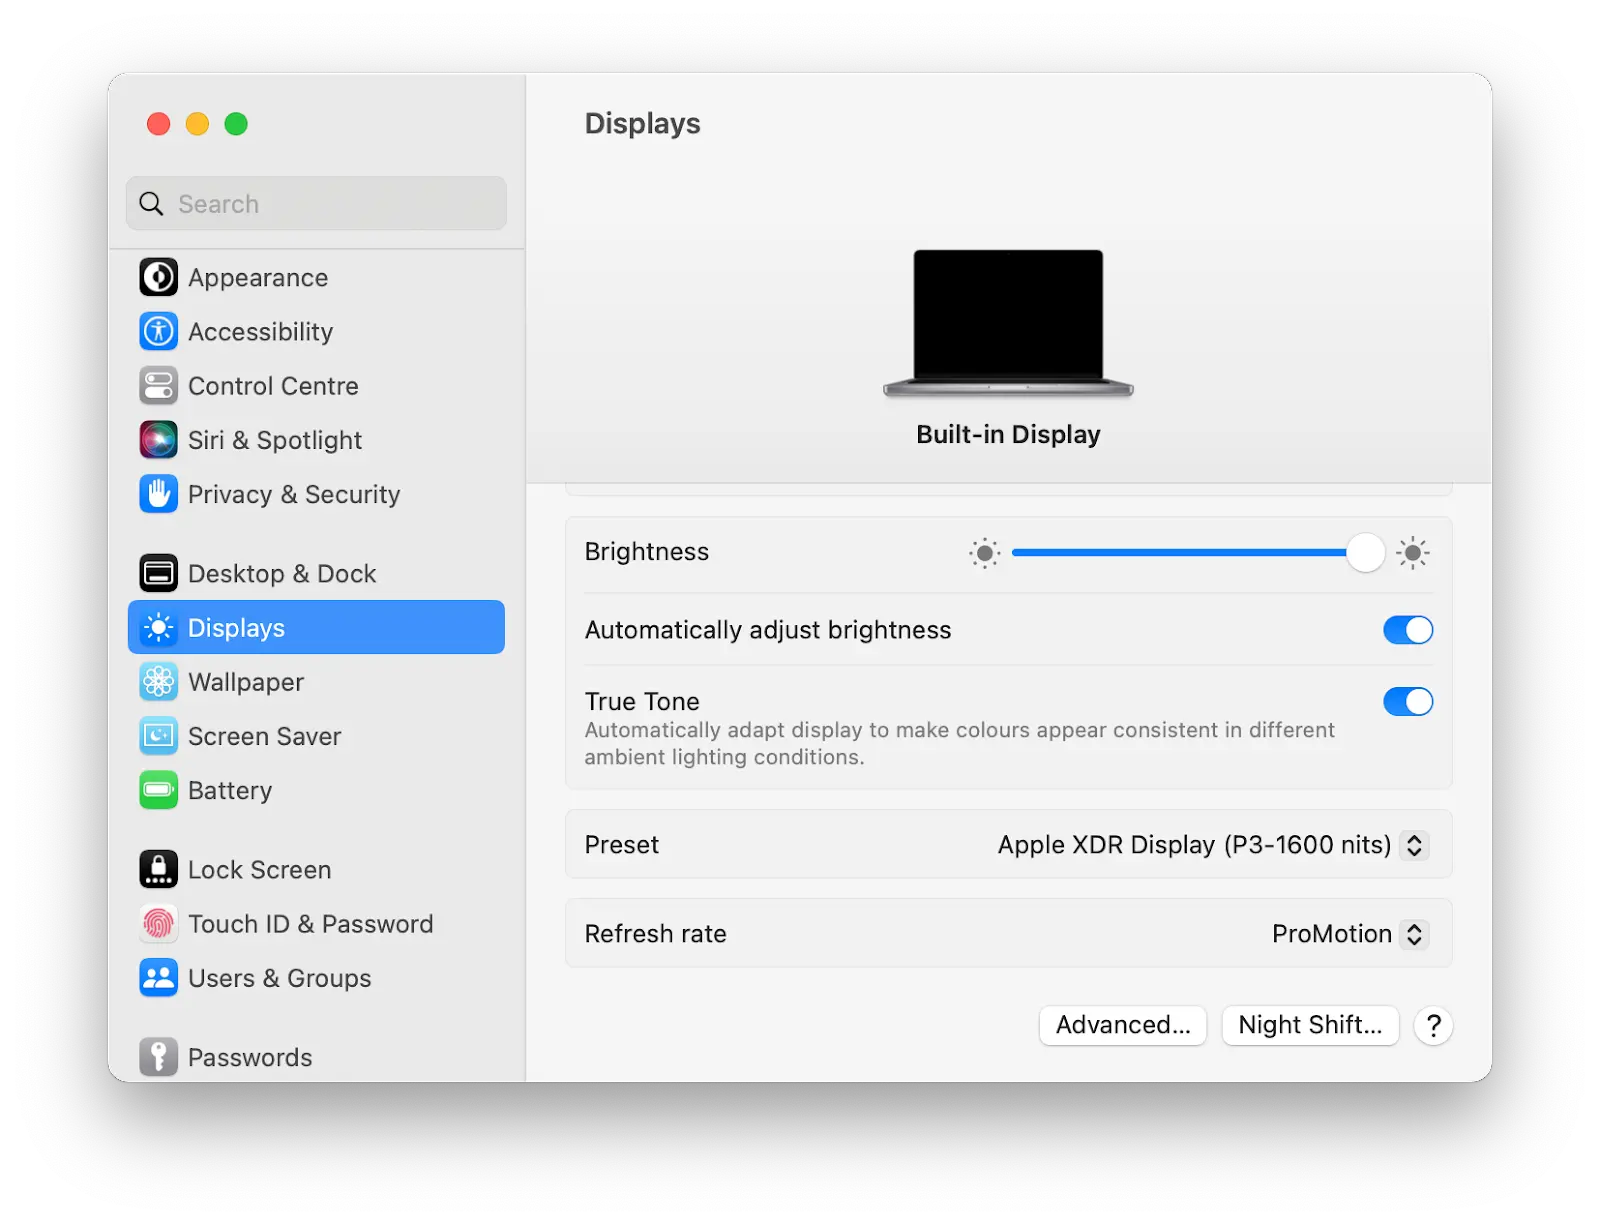 Night Shift... in Displays settings on macOS